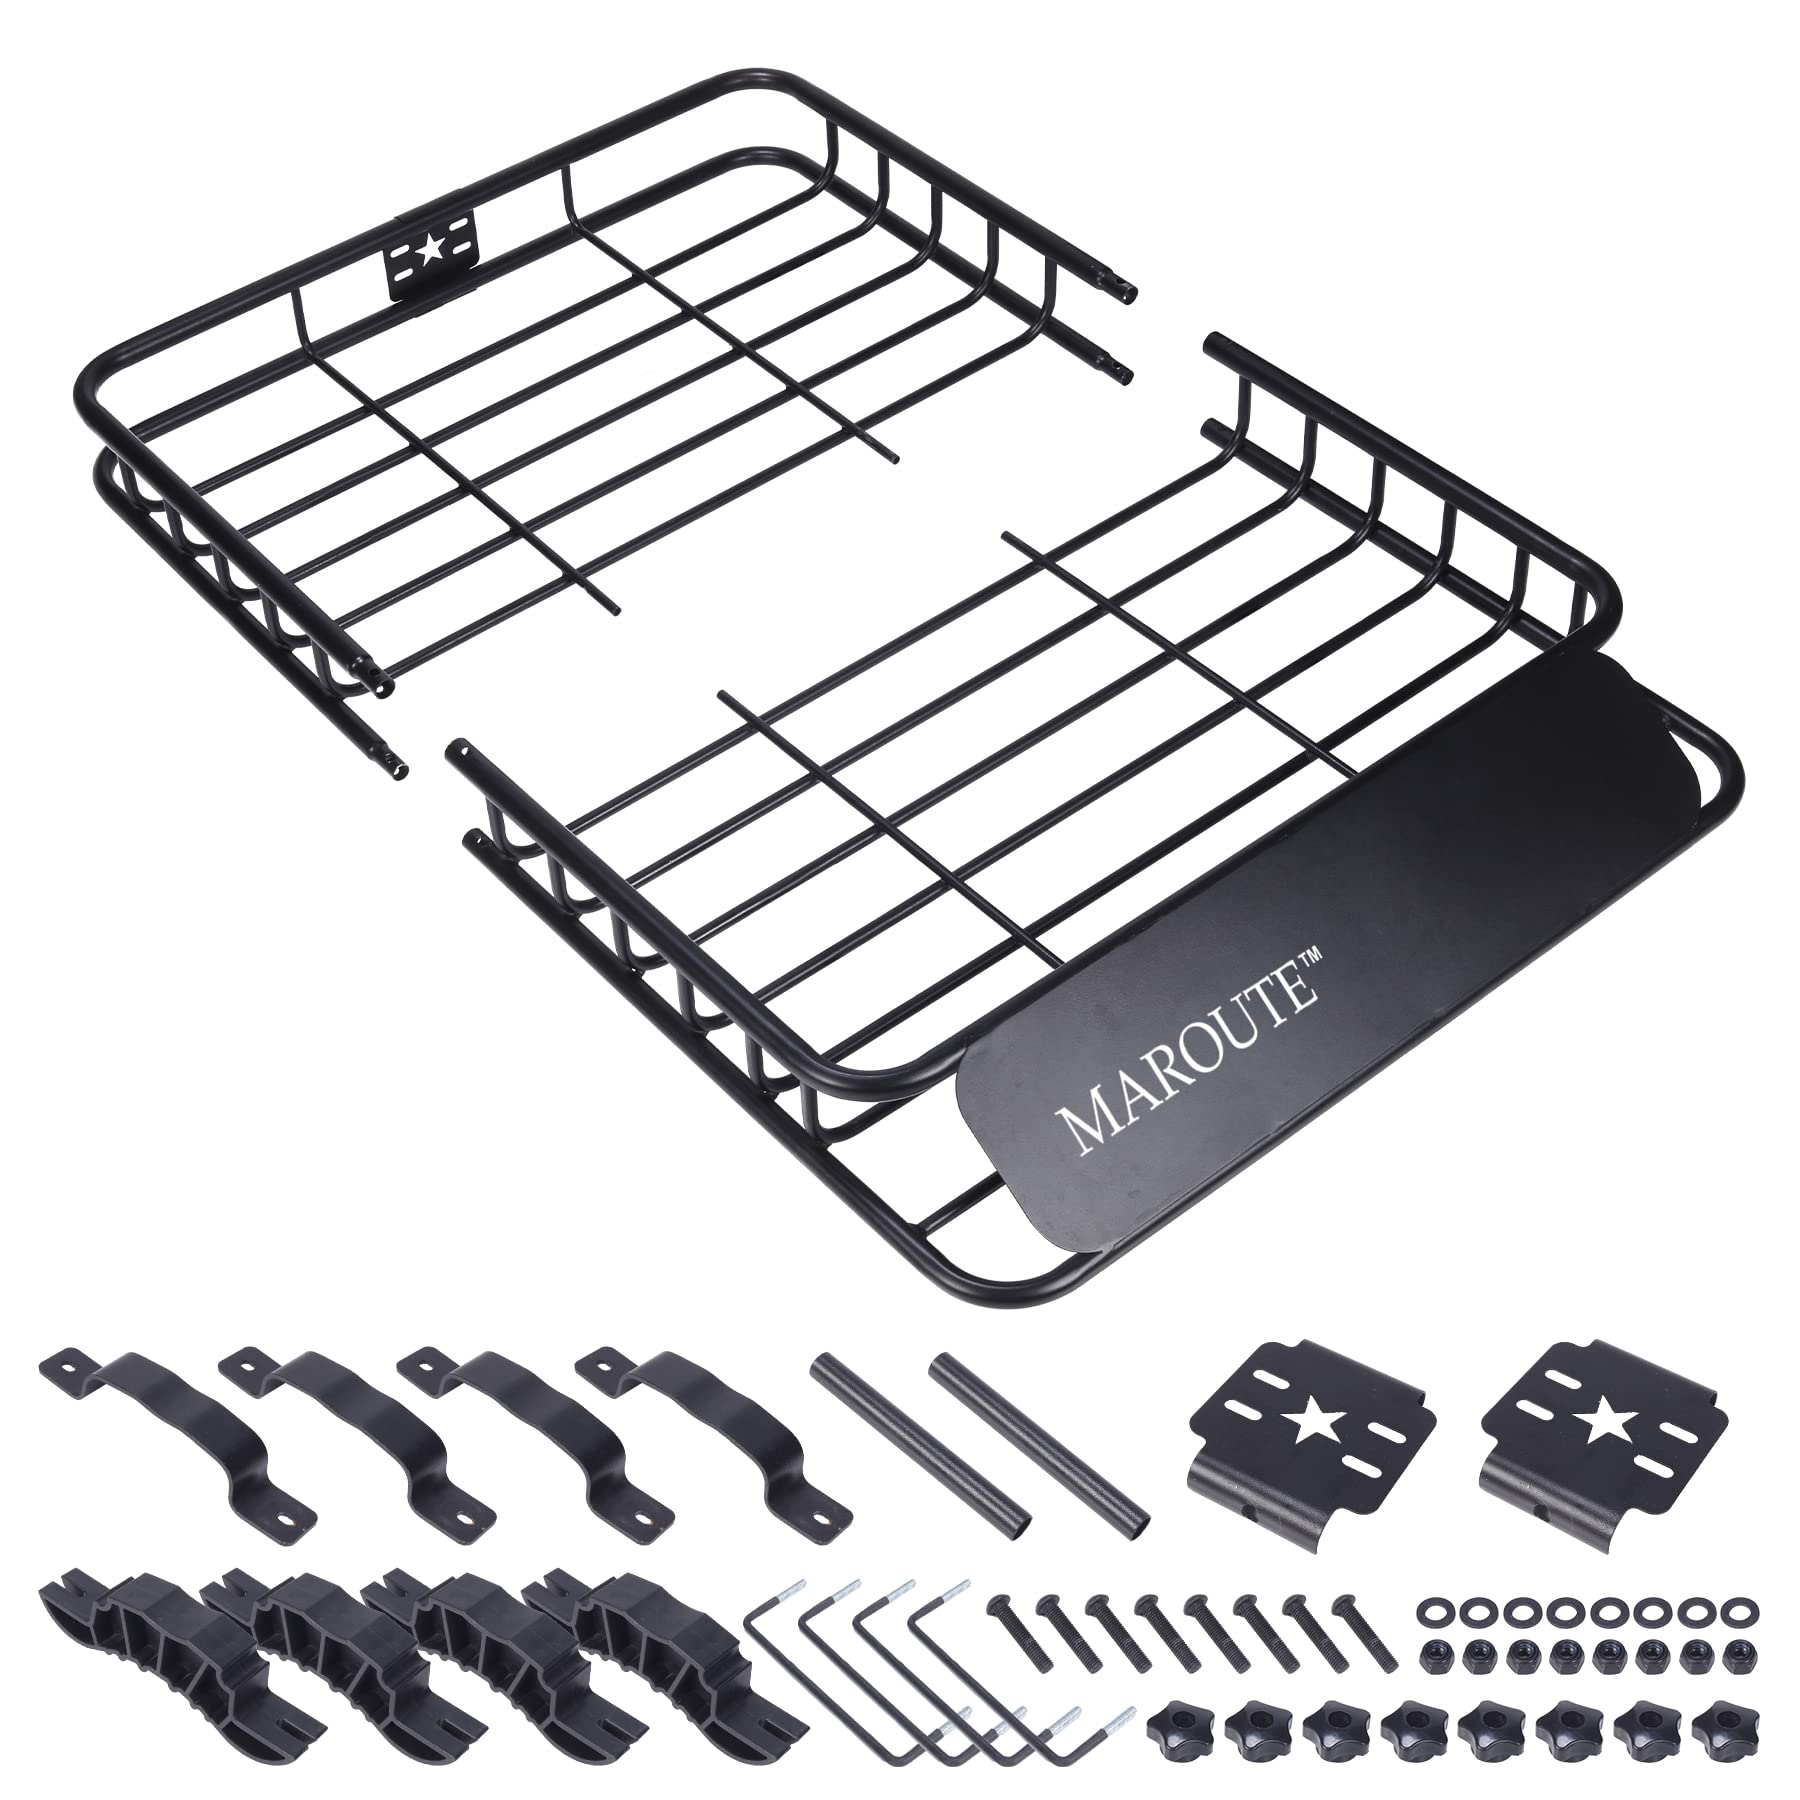 Roof Rack Carrier Basket Universal 51" X 36" X 5" Rooftop Cargo Carrier Basket Car Luggage Holder Universal for SUV Cars- 200 lb. Capacity (ROOF Basket)